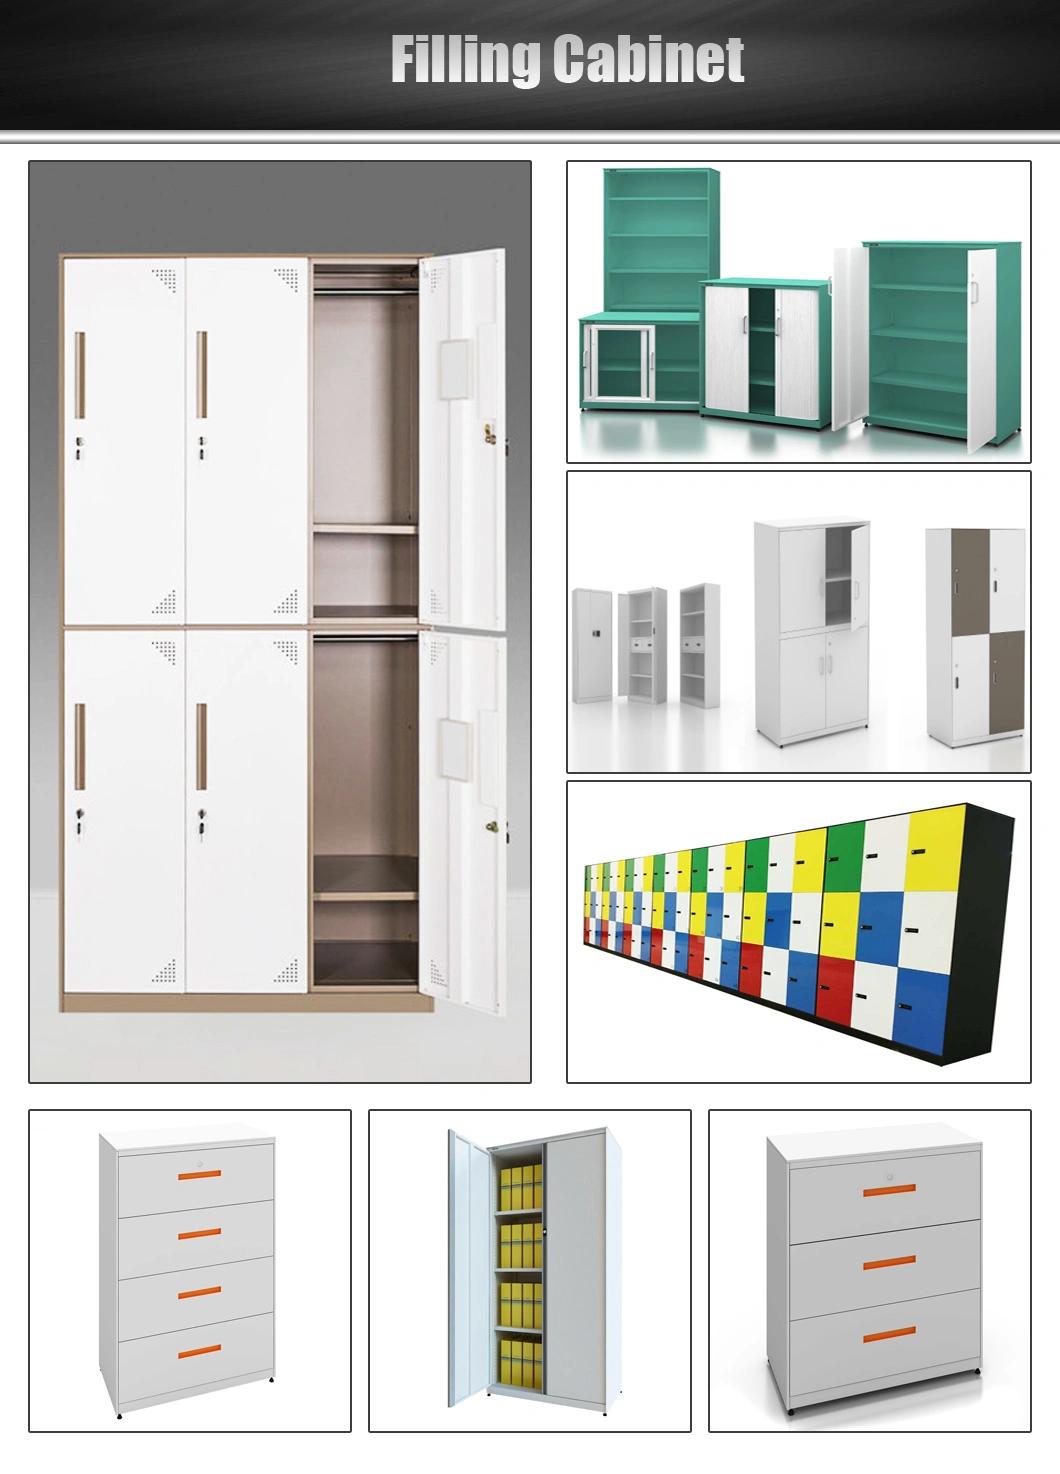 Hot Sale Work Storage Cabinets with Environmentally-Friendly Materials